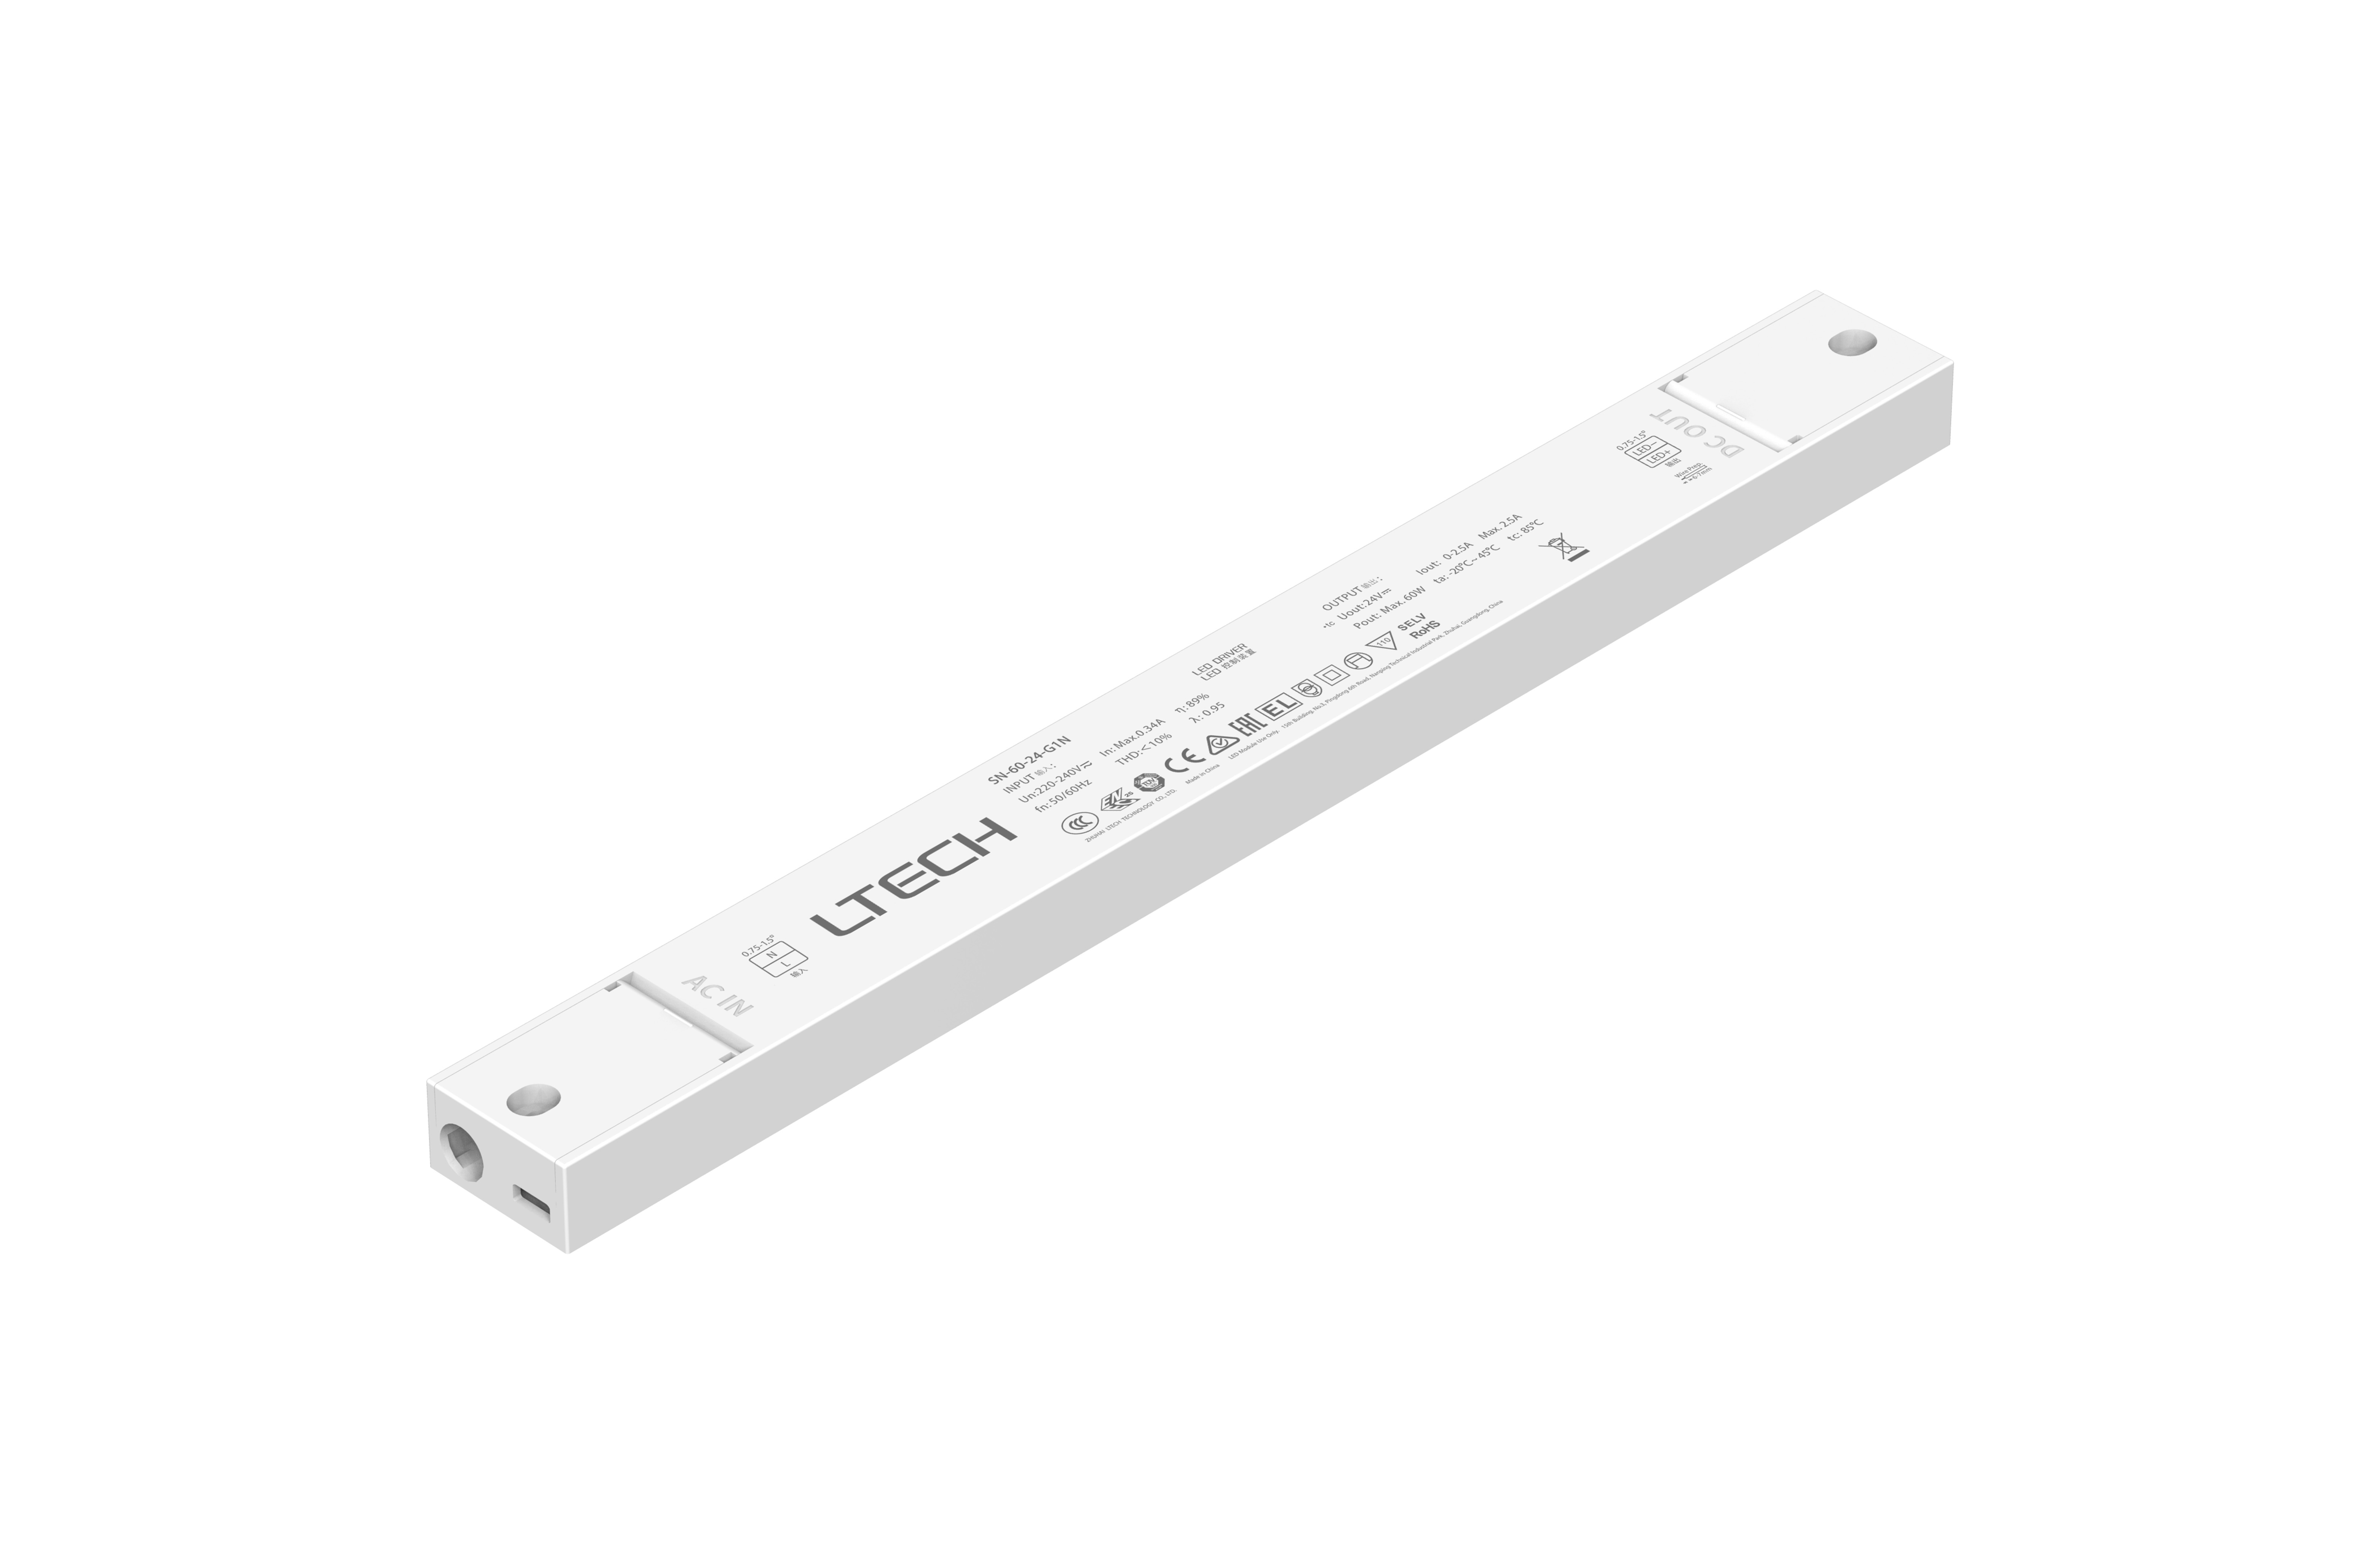 SN-60-24-G1N  Intelligent Constant Voltage  LED Driver; ON/OFF; 60W; 24VDC 2.5A ; 220-240Vac; IP20; 5yrs Warrenty.